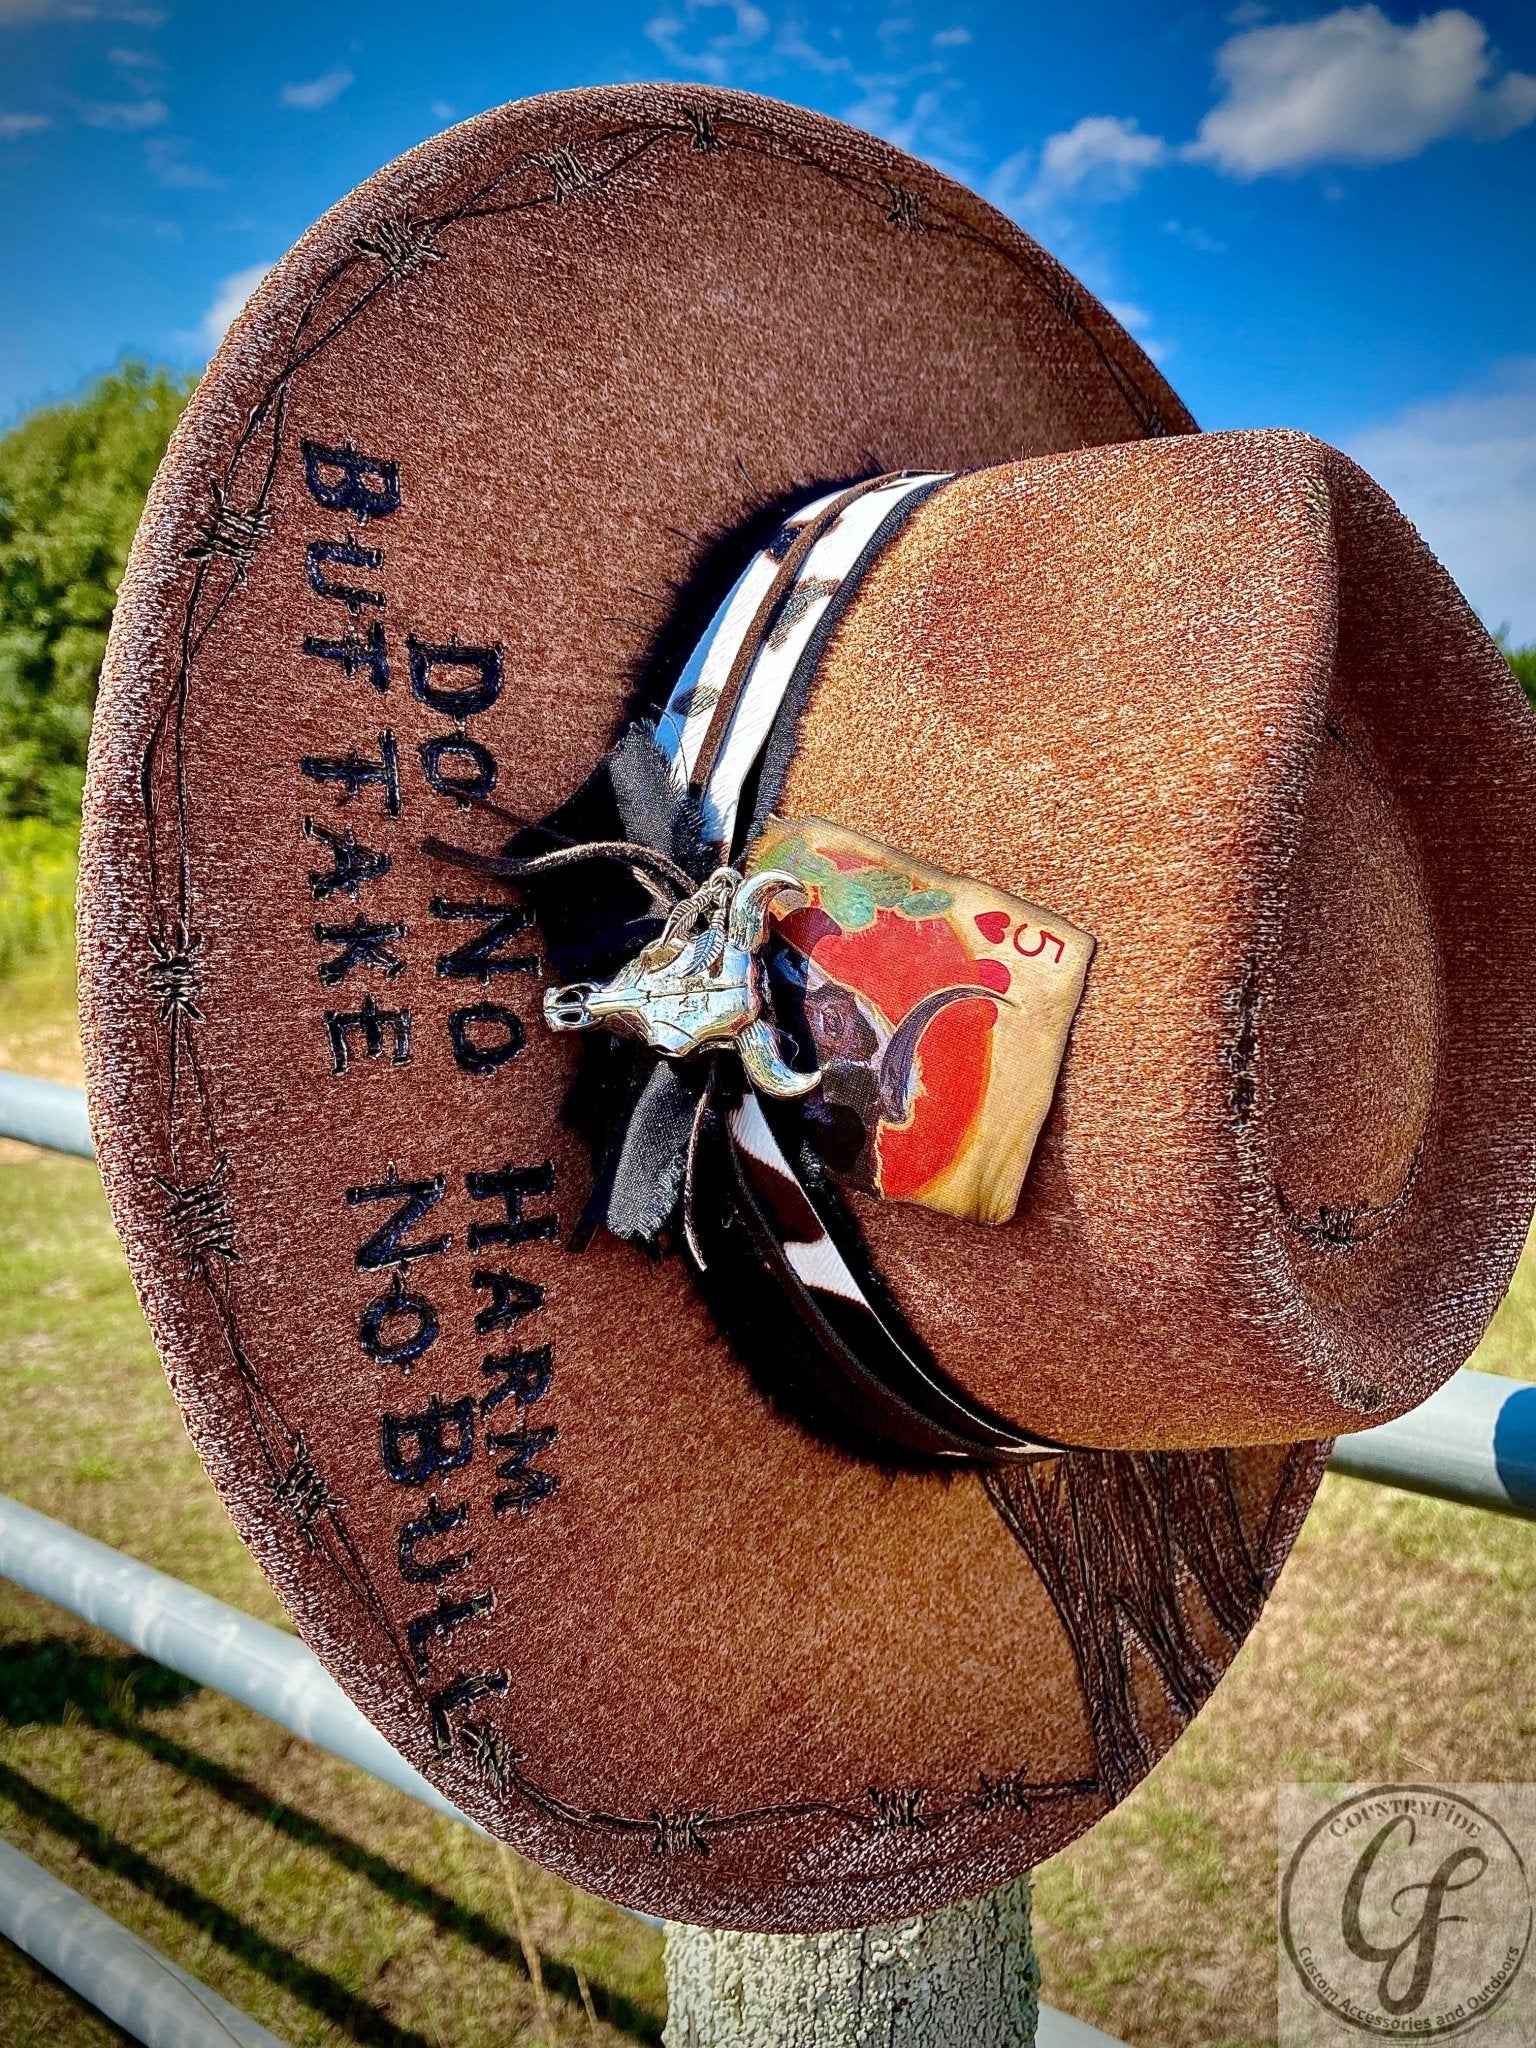 TAKE NO BULL FEDORA - CountryFide Custom Accessories and Outdoors